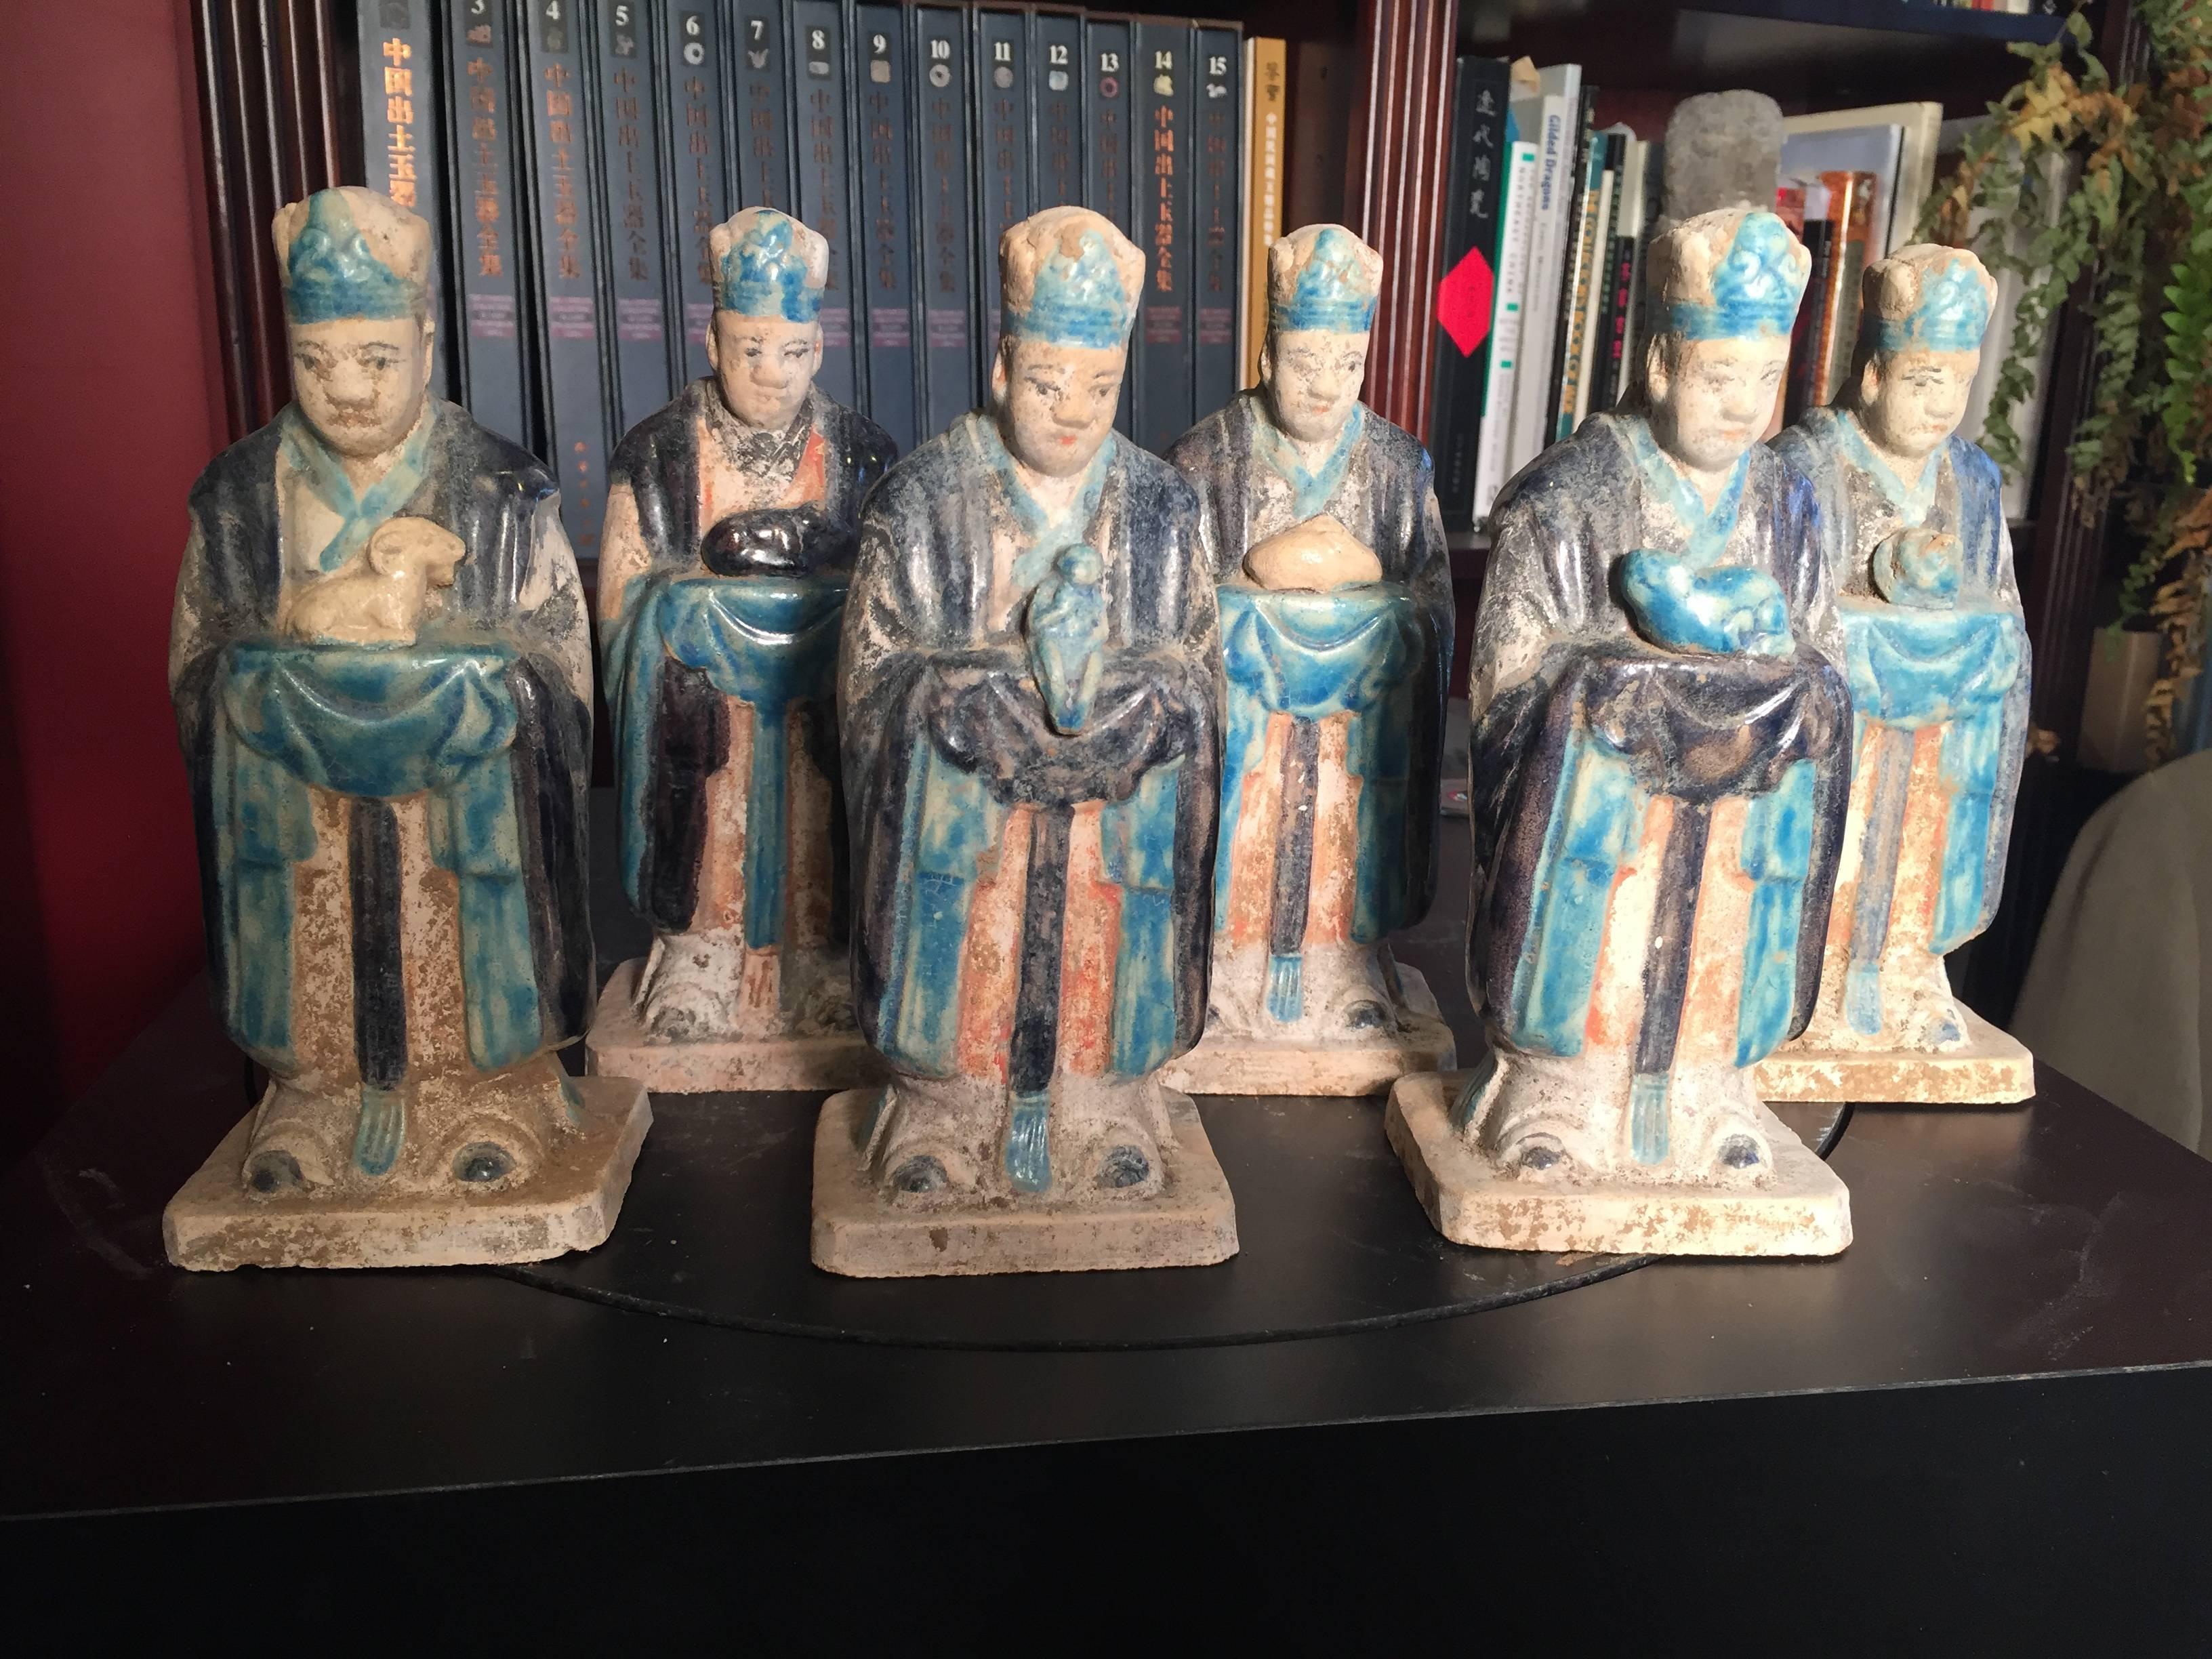 Important ancient Chinese Zodiac complete collection twelve (12) figures each holding a zodiac attribute, Ming Dynasty 1368-1644. Superb quality.

Each of these twelve (12) tomb figures holds a different animal from the zodiac. Twelve (12) Zodiacs